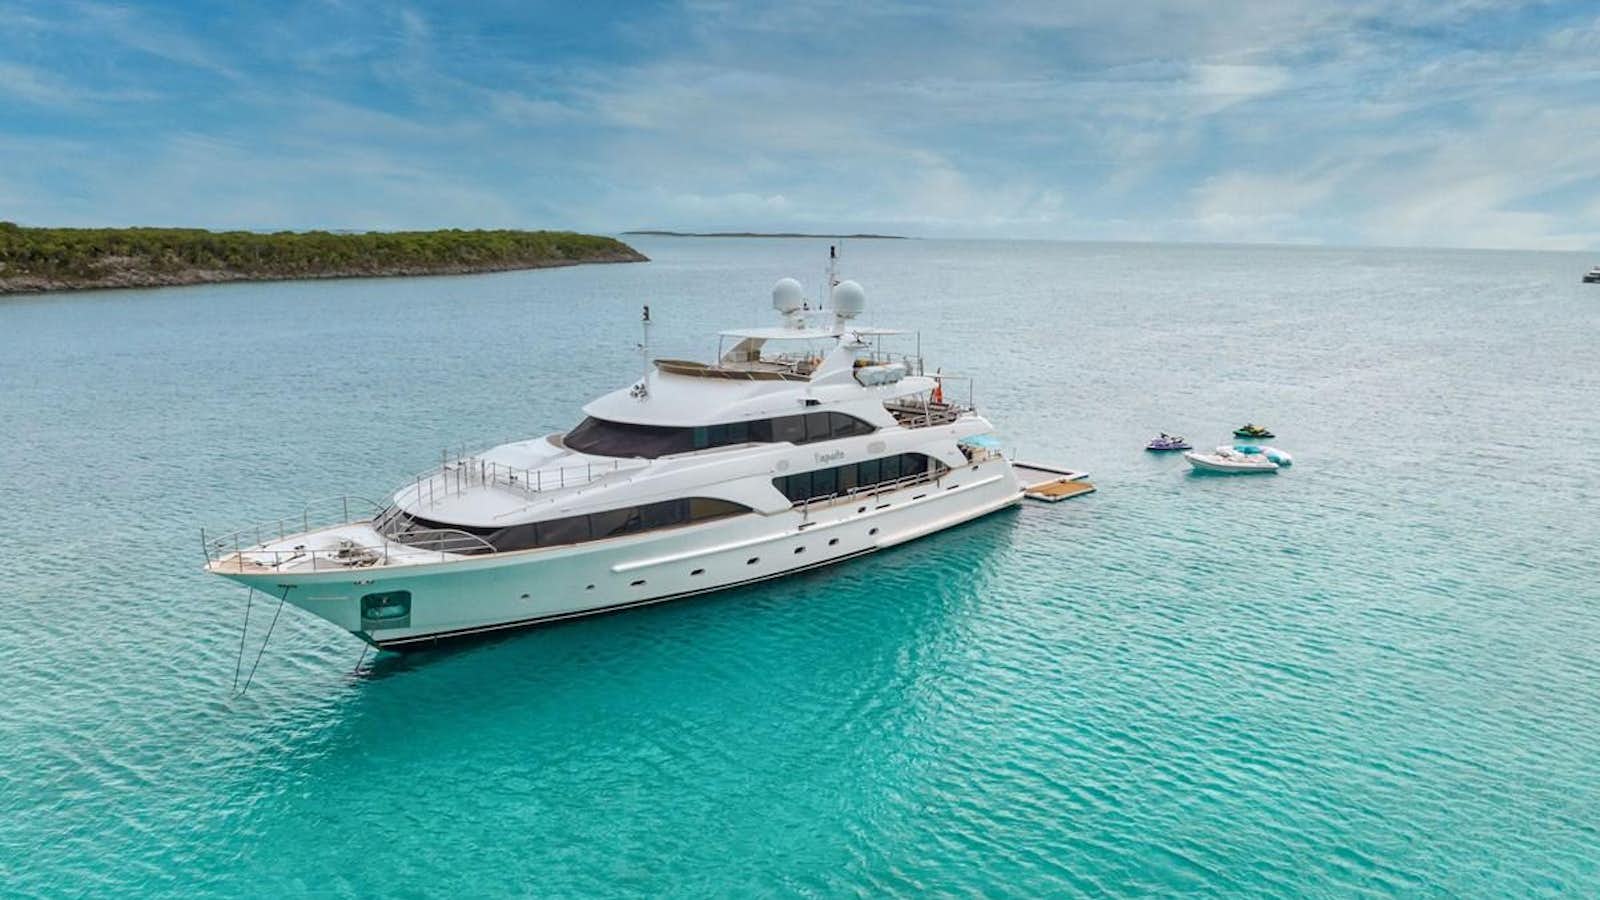 Papaito
Yacht for Sale